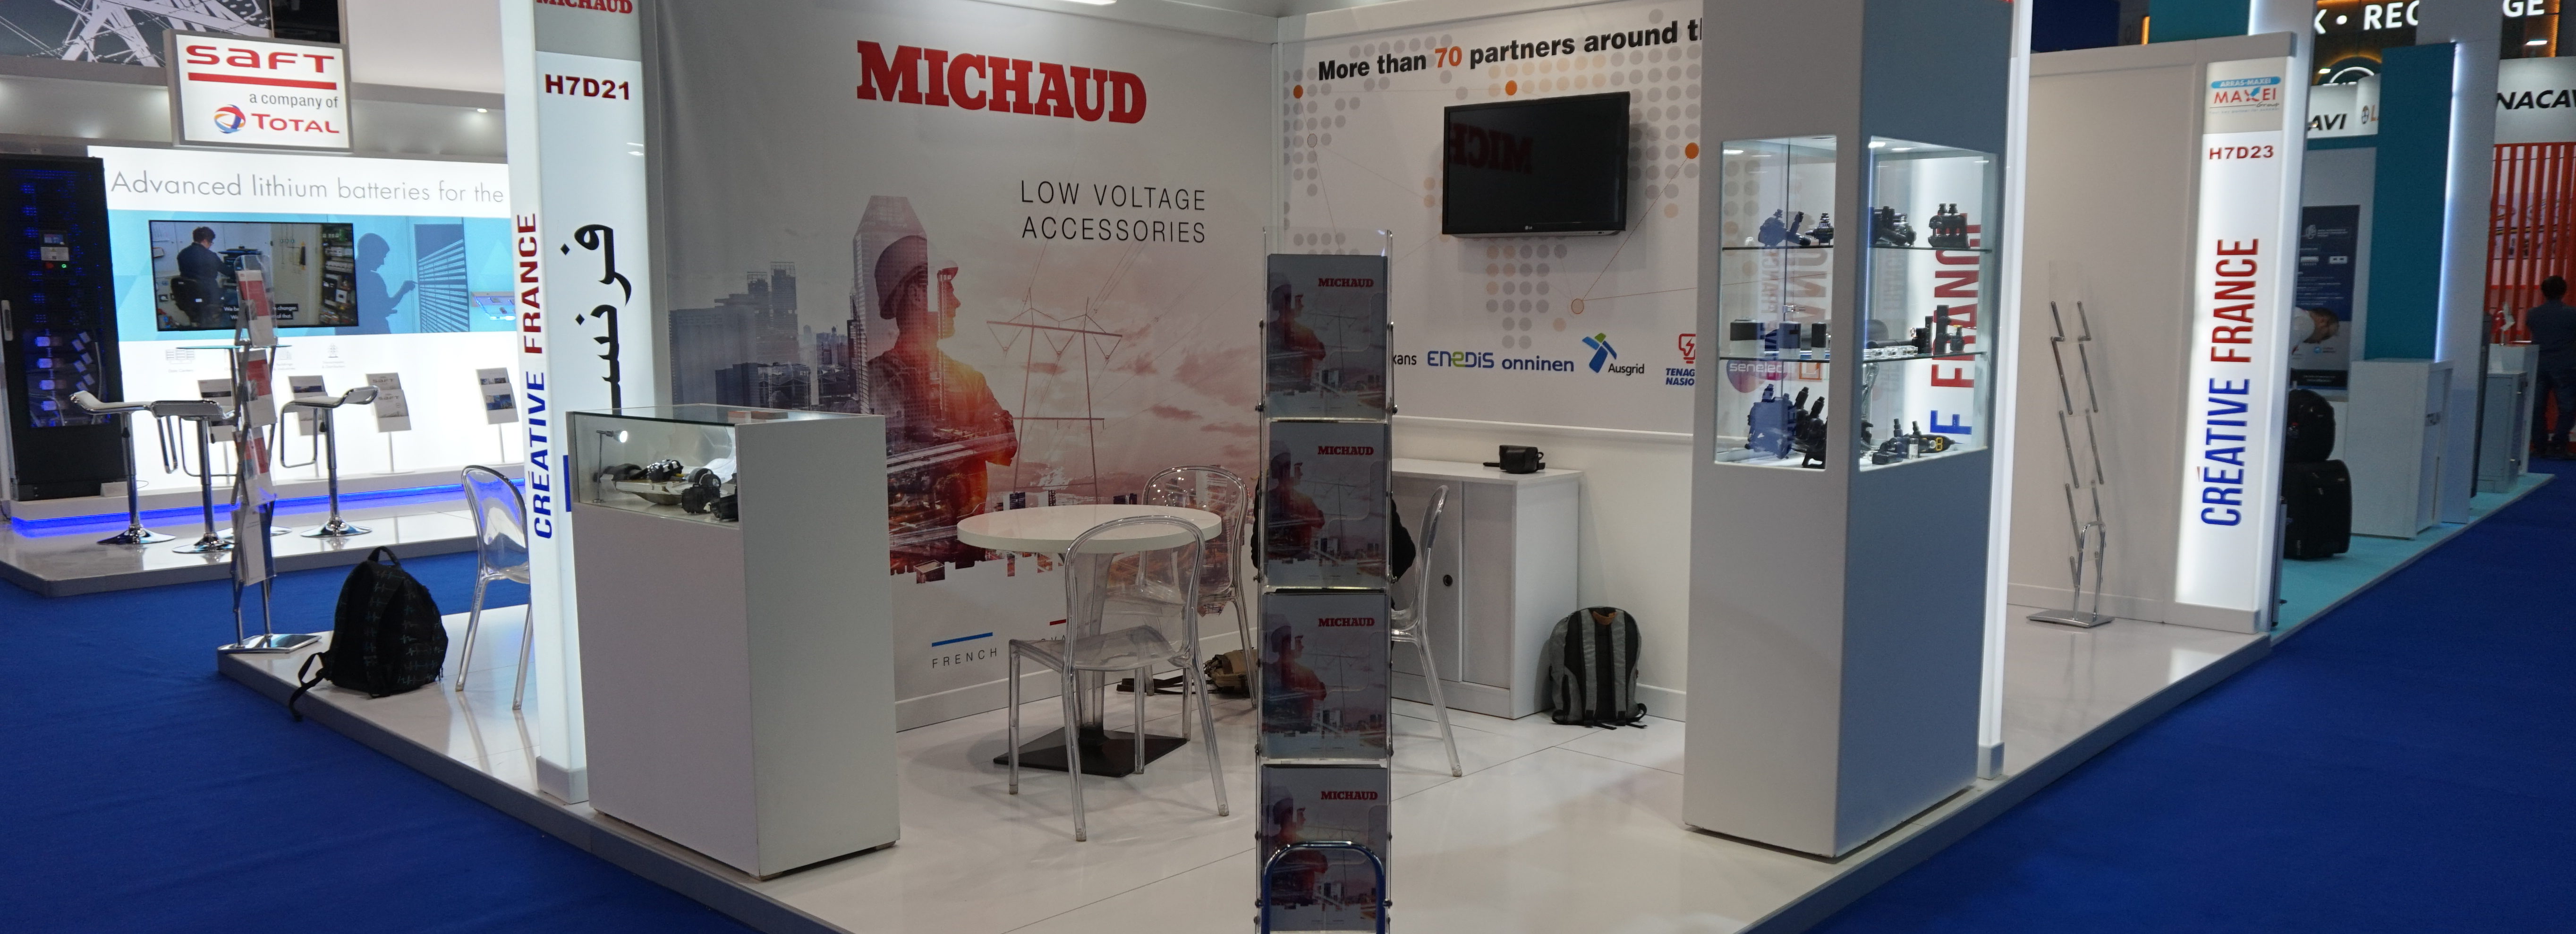 Booth Michaud show Middle Electricty 2019